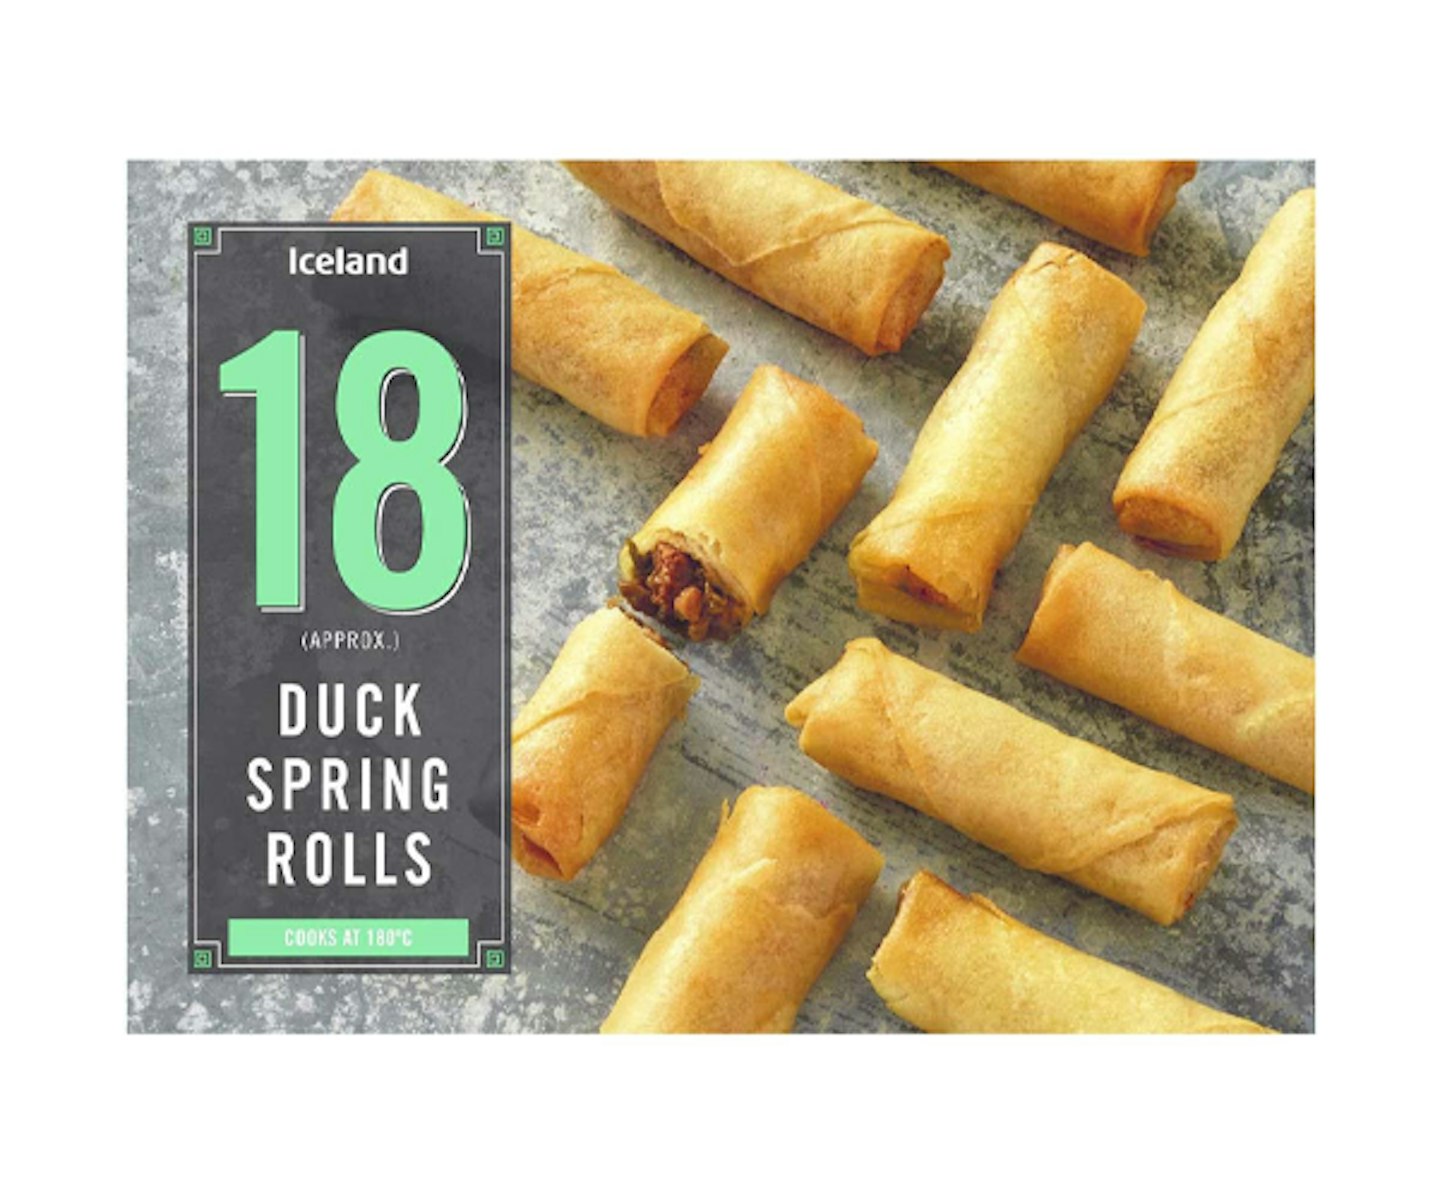 Iceland 18 (Approx.) Duck Spring Rolls 324g